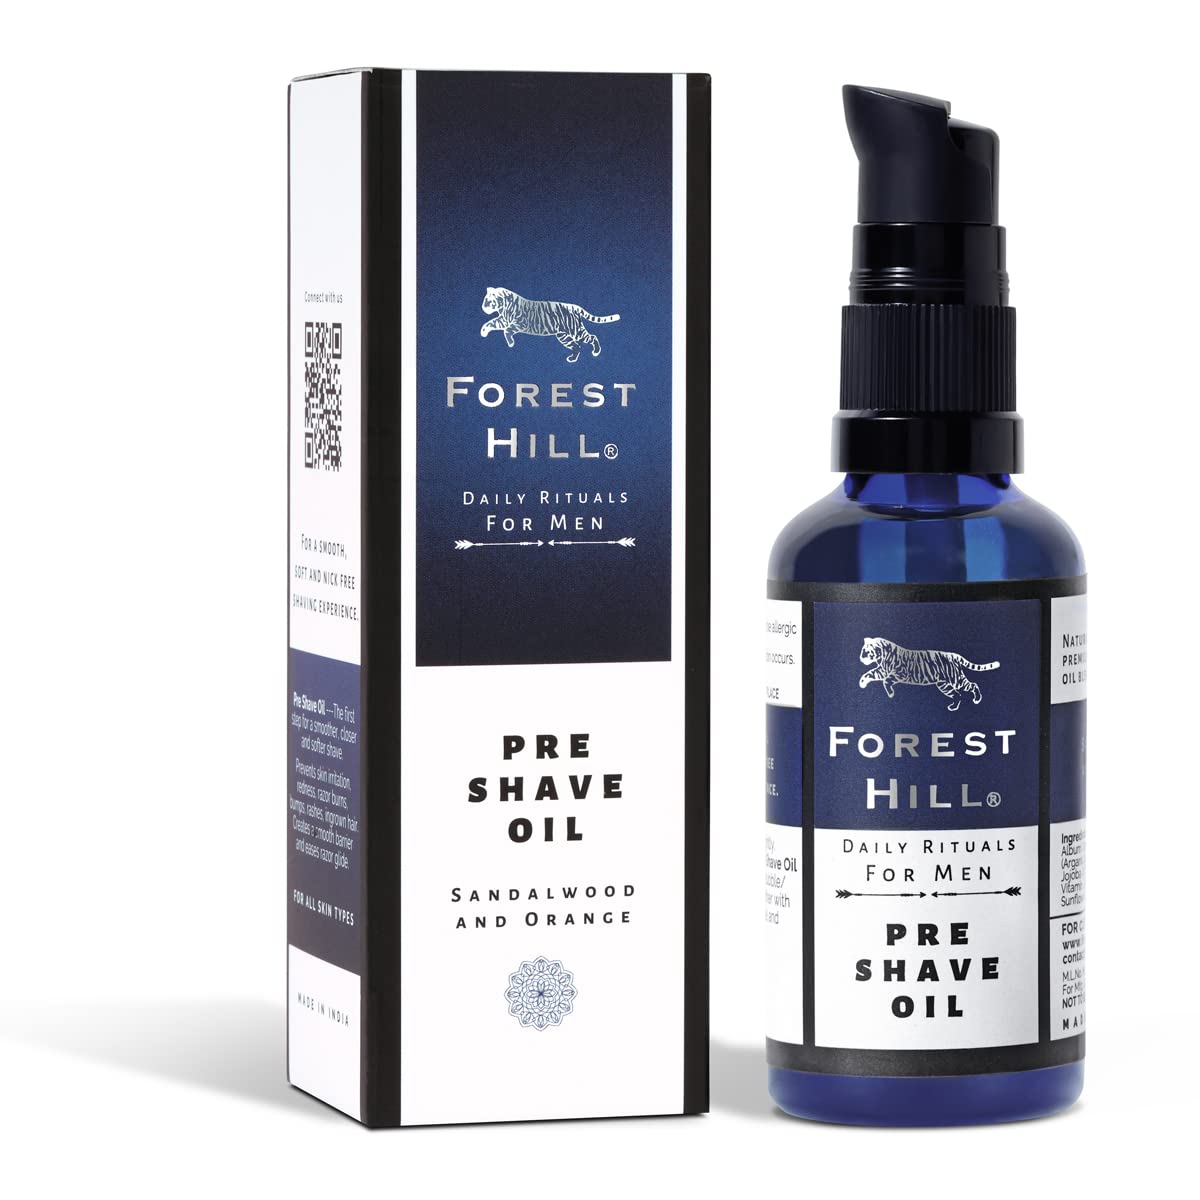 Forest Hill pre shave oil, 50ml